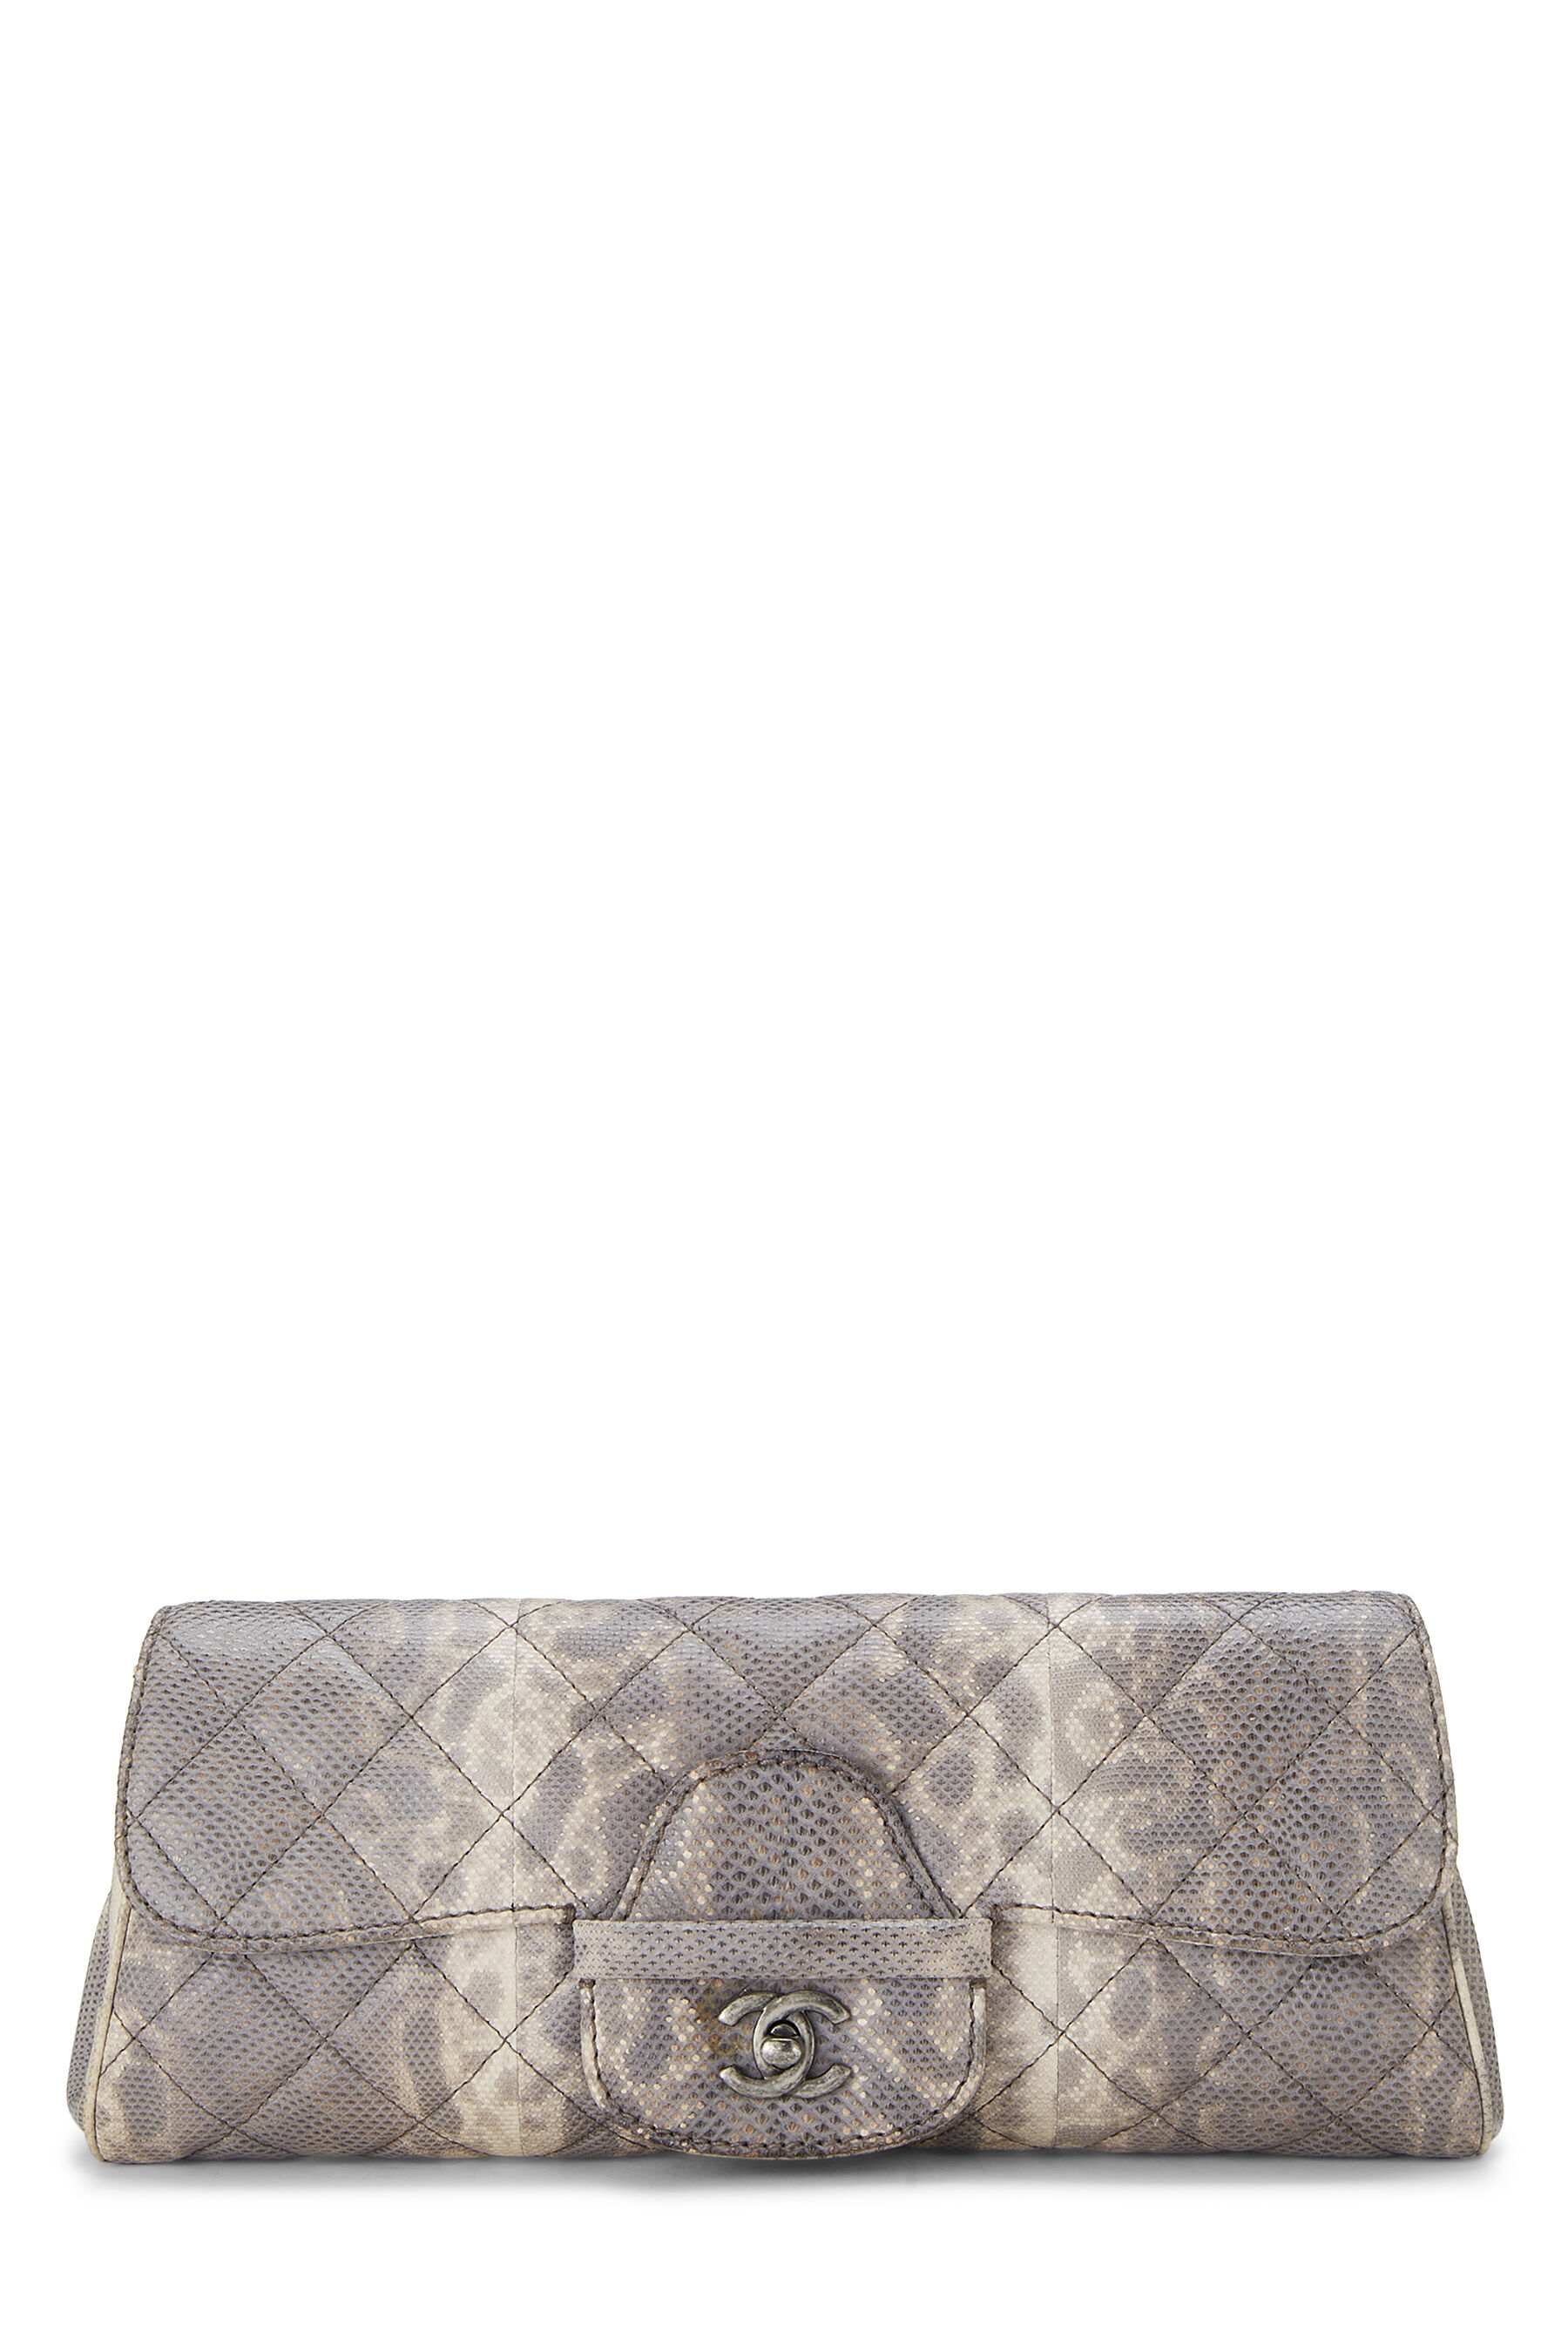 Chanel - Grey Embossed Snakeskin Quilted Clutch